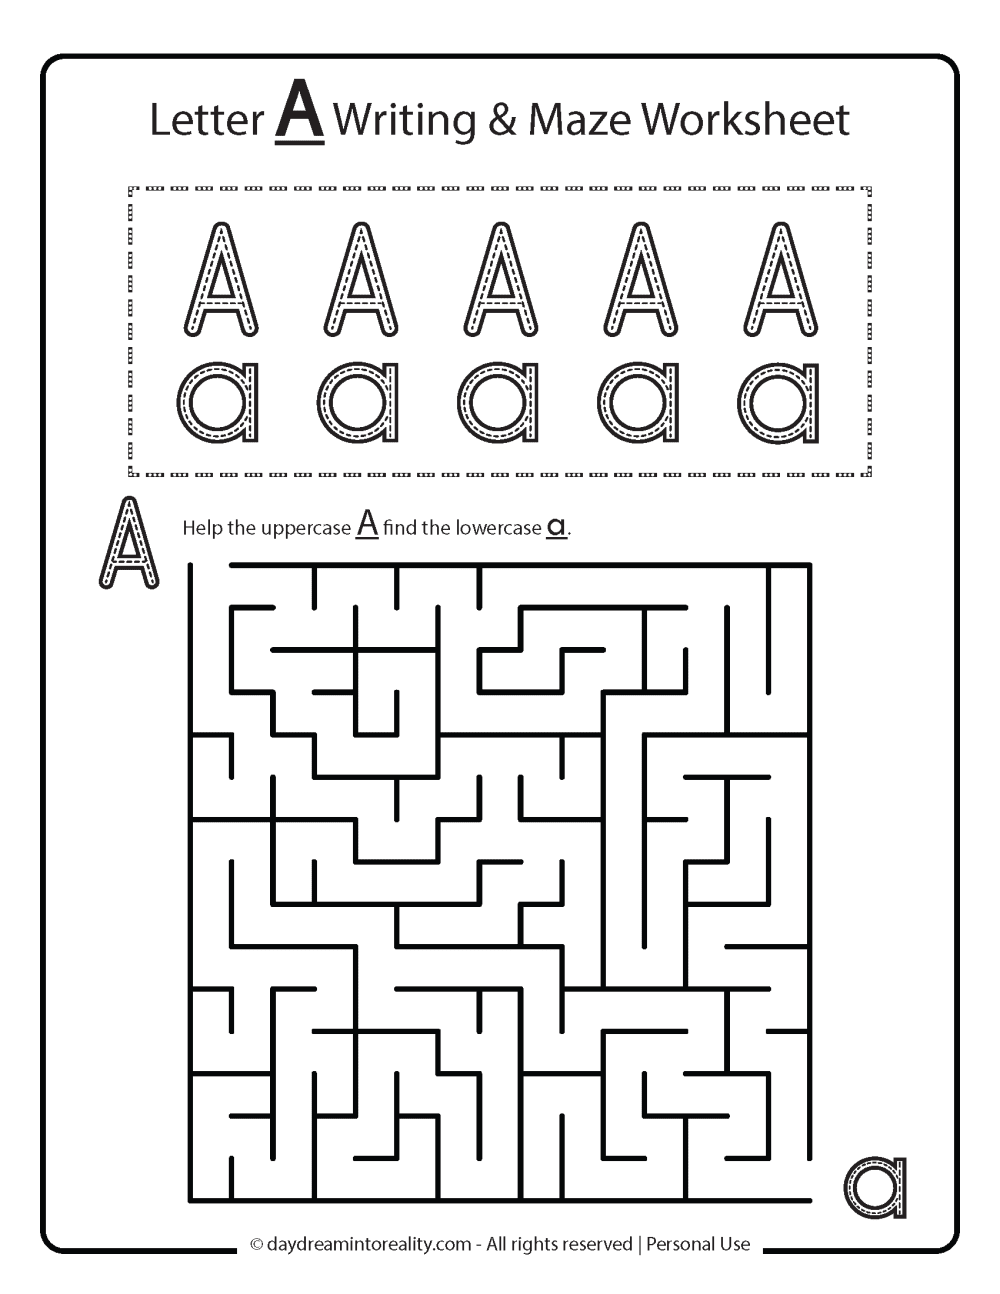 Letter A writing and maze